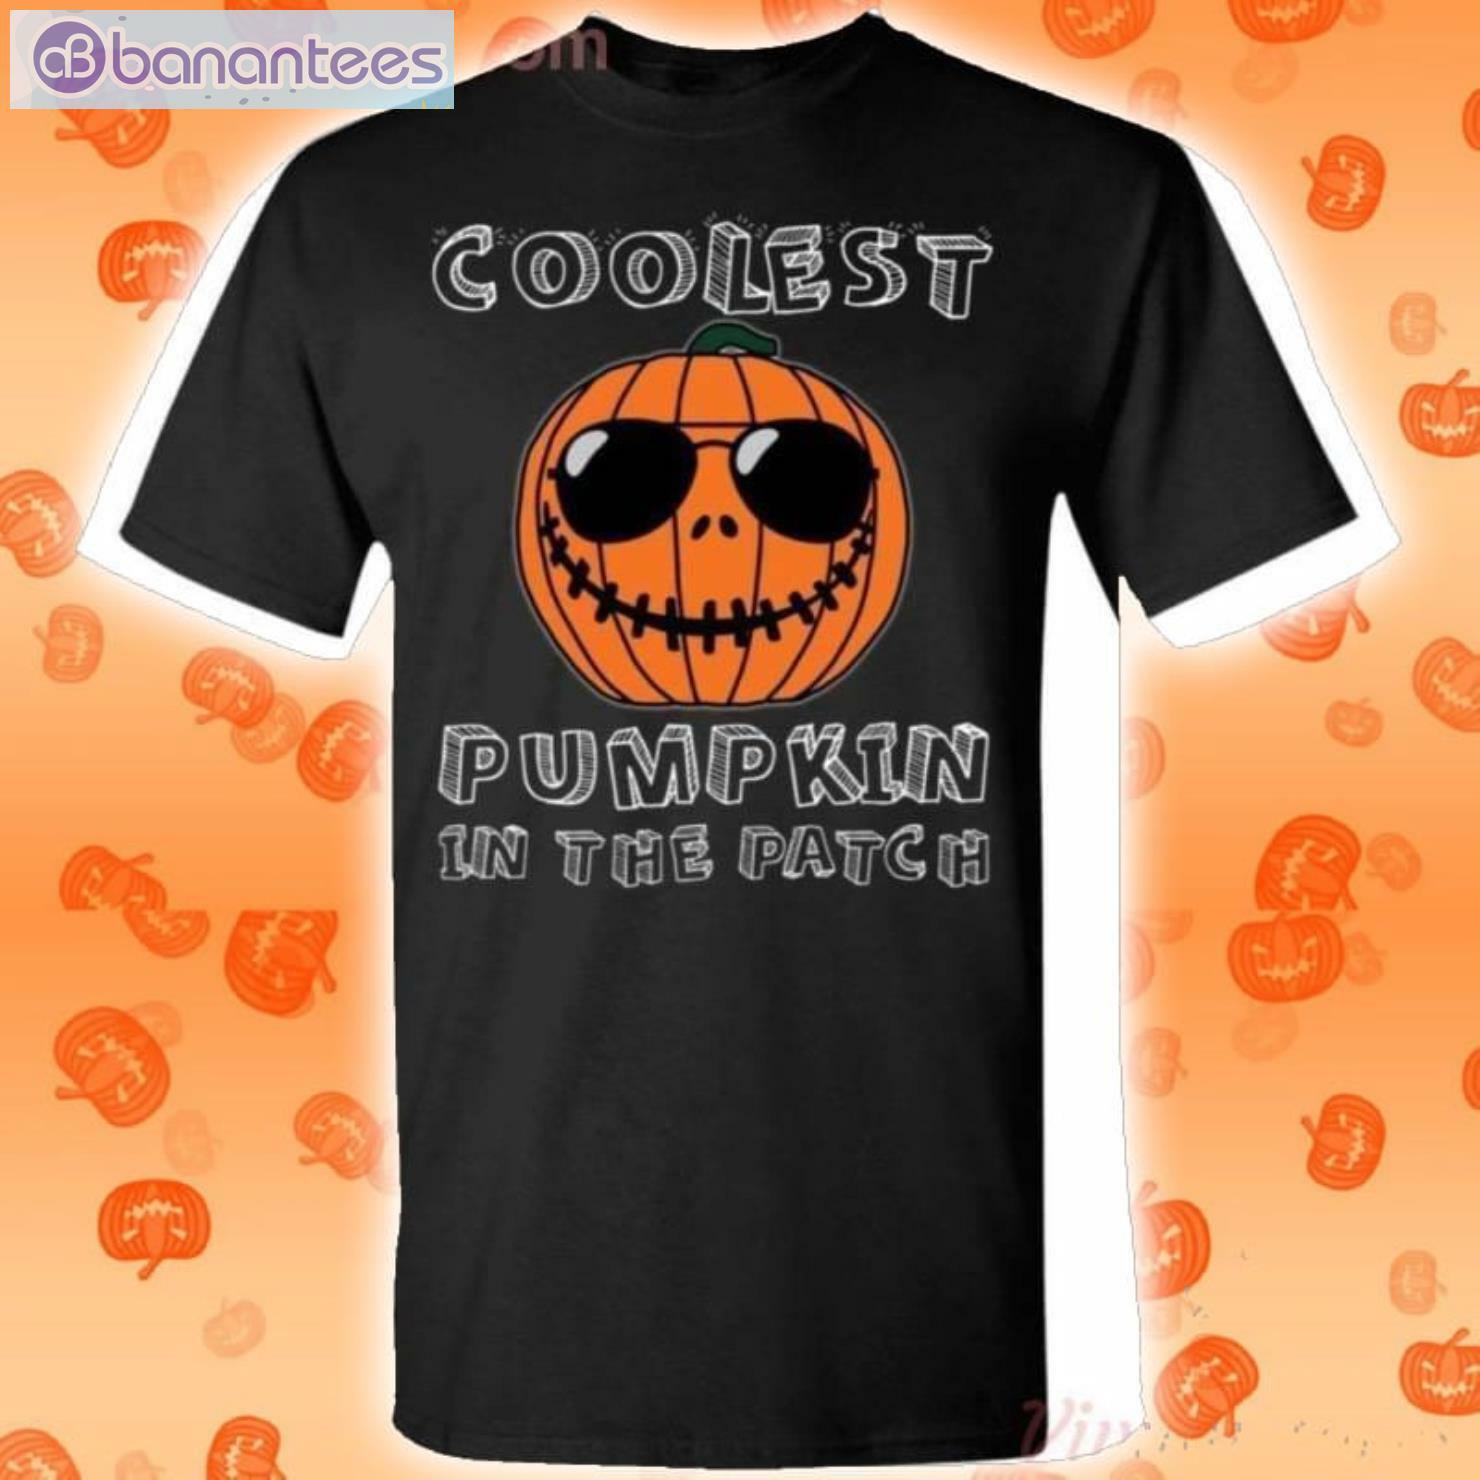 Coolest Pumpkin In The Patch Funny Halloween T-Shirt Product Photo 1 Product photo 1